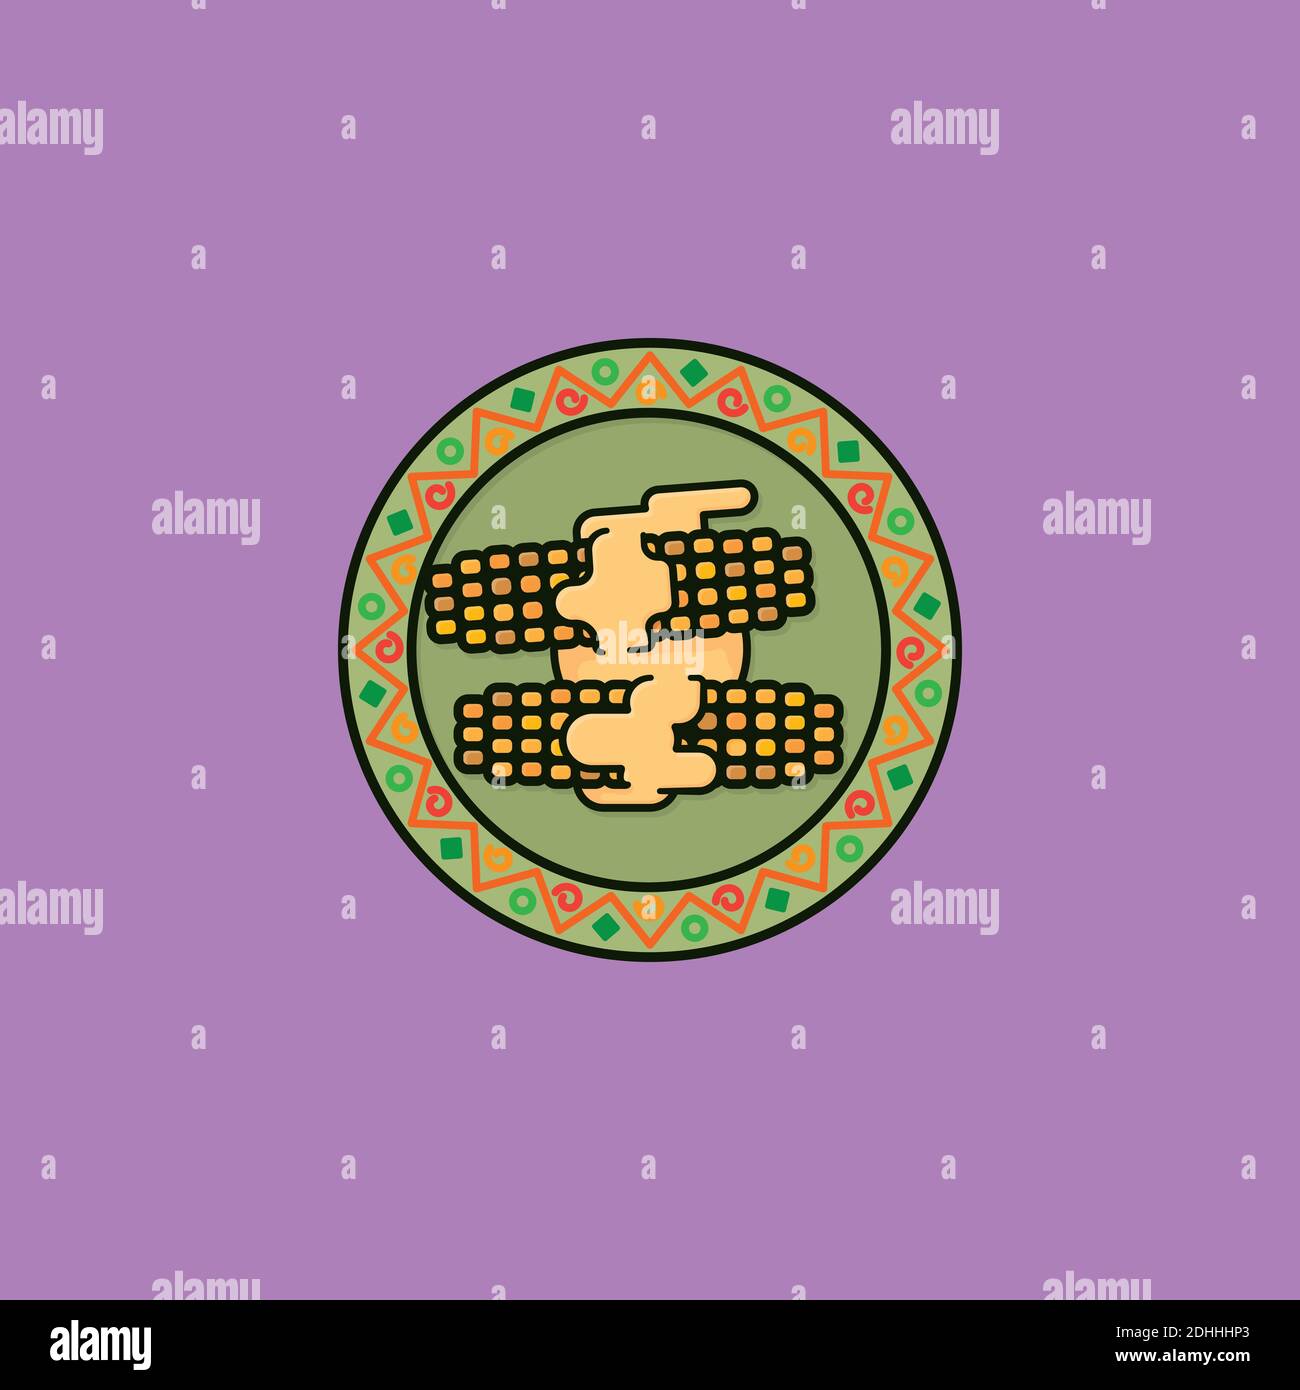 Buttered corn cobs on plate with mexican design top view vector illustration for Buttered Corn Day on August 23 Stock Vector